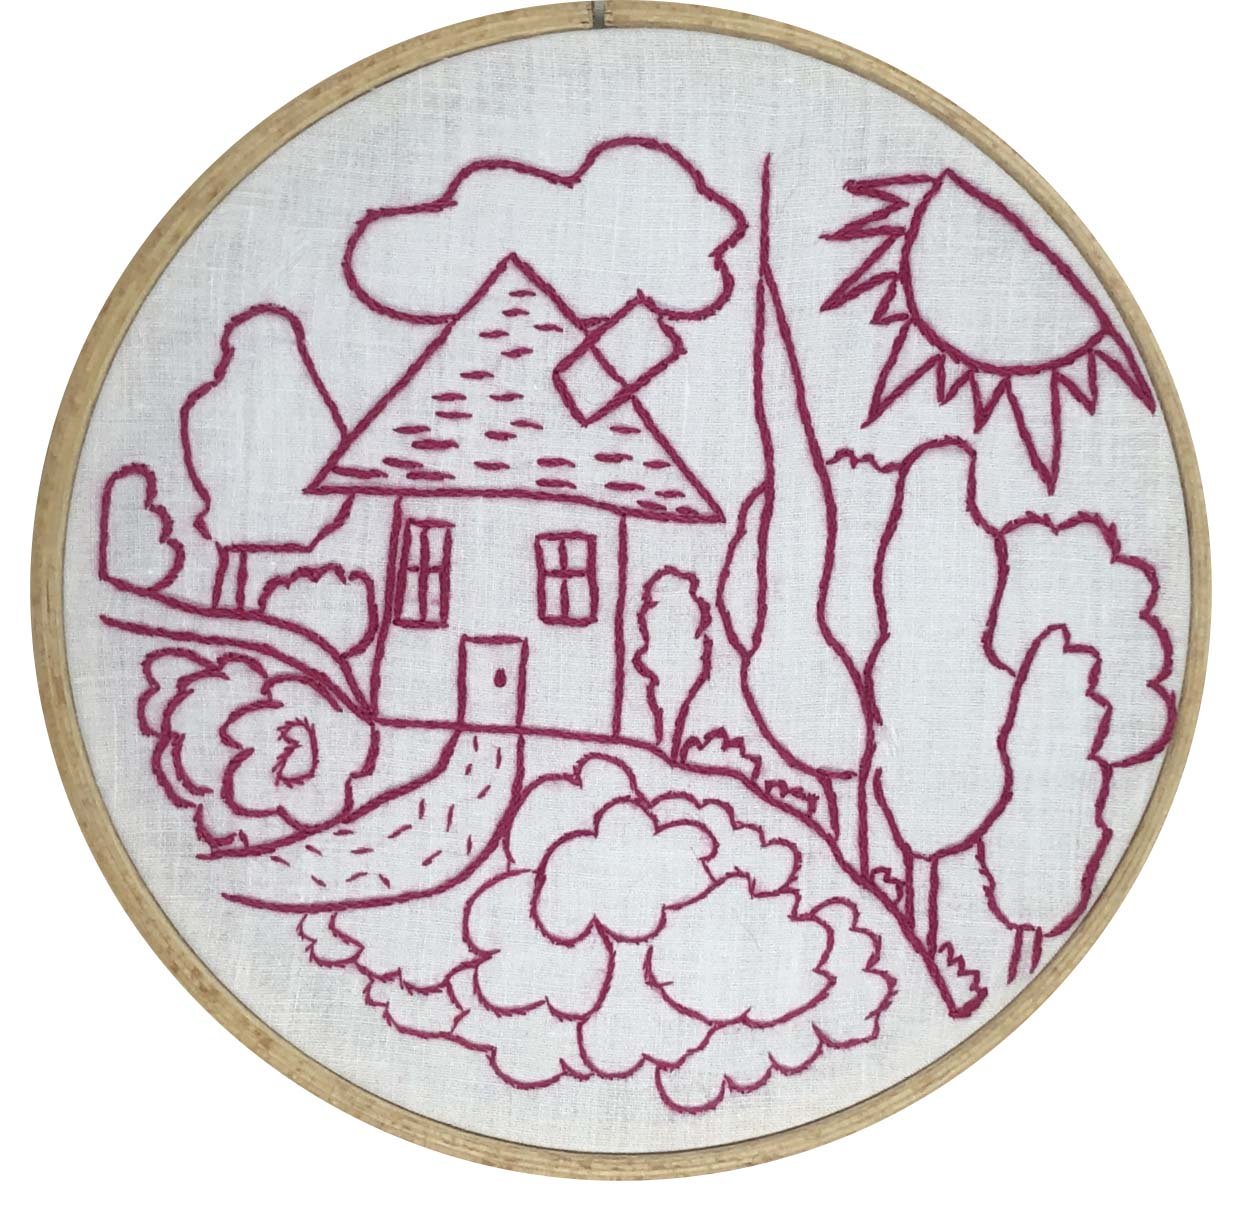 Kit de broderie traditionnelle : Tiny house 